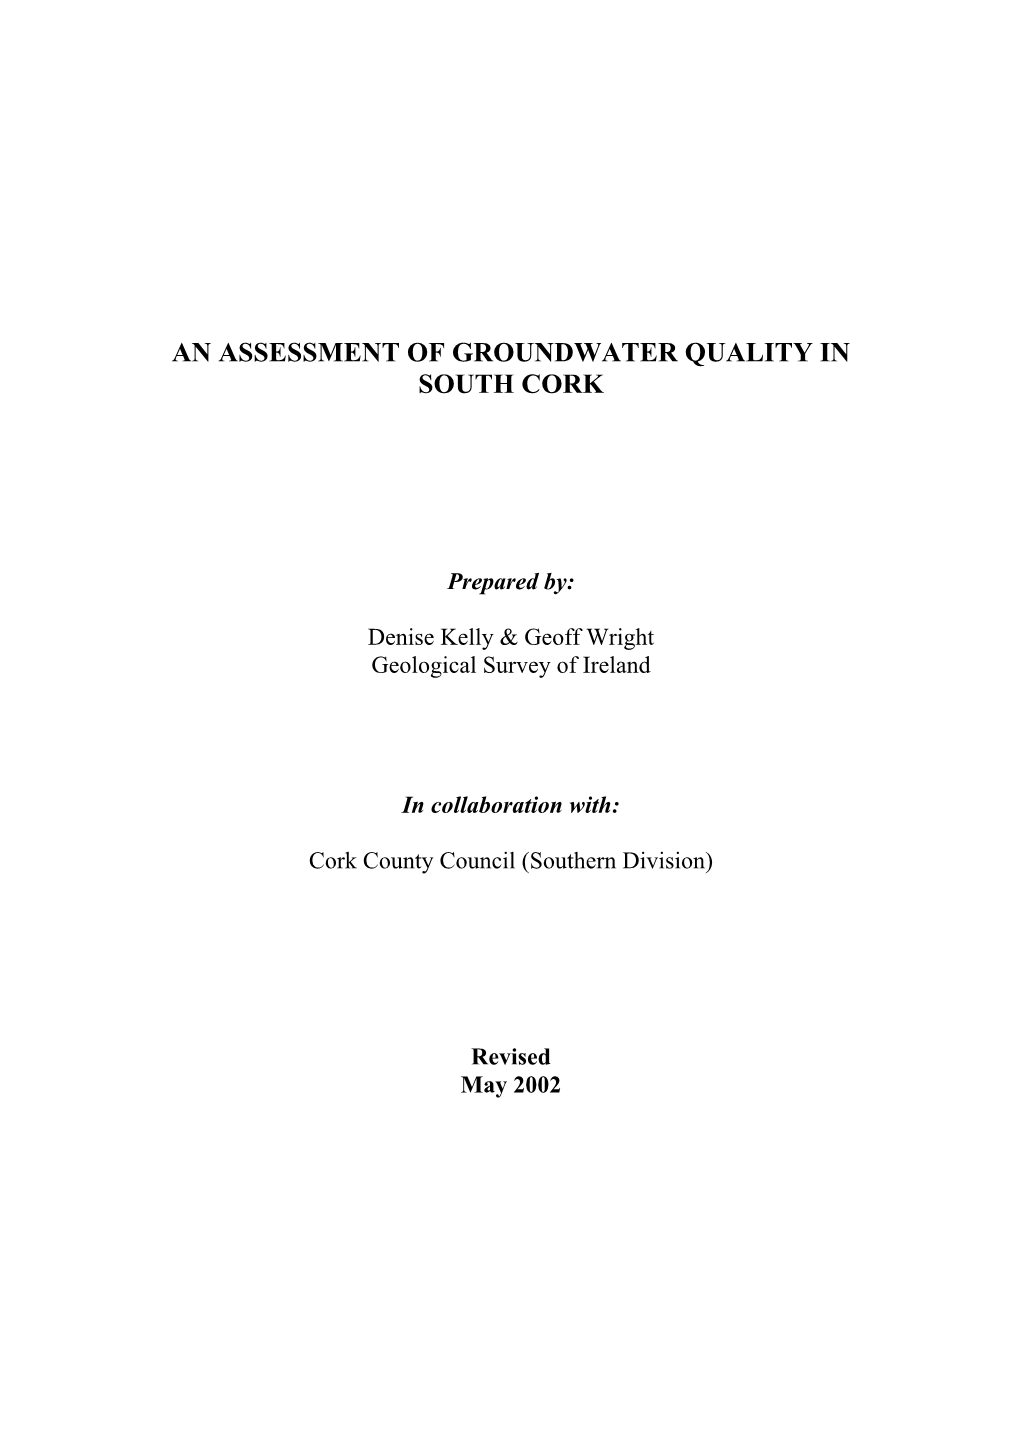 An Assessment of Groundwater Quality in South Cork